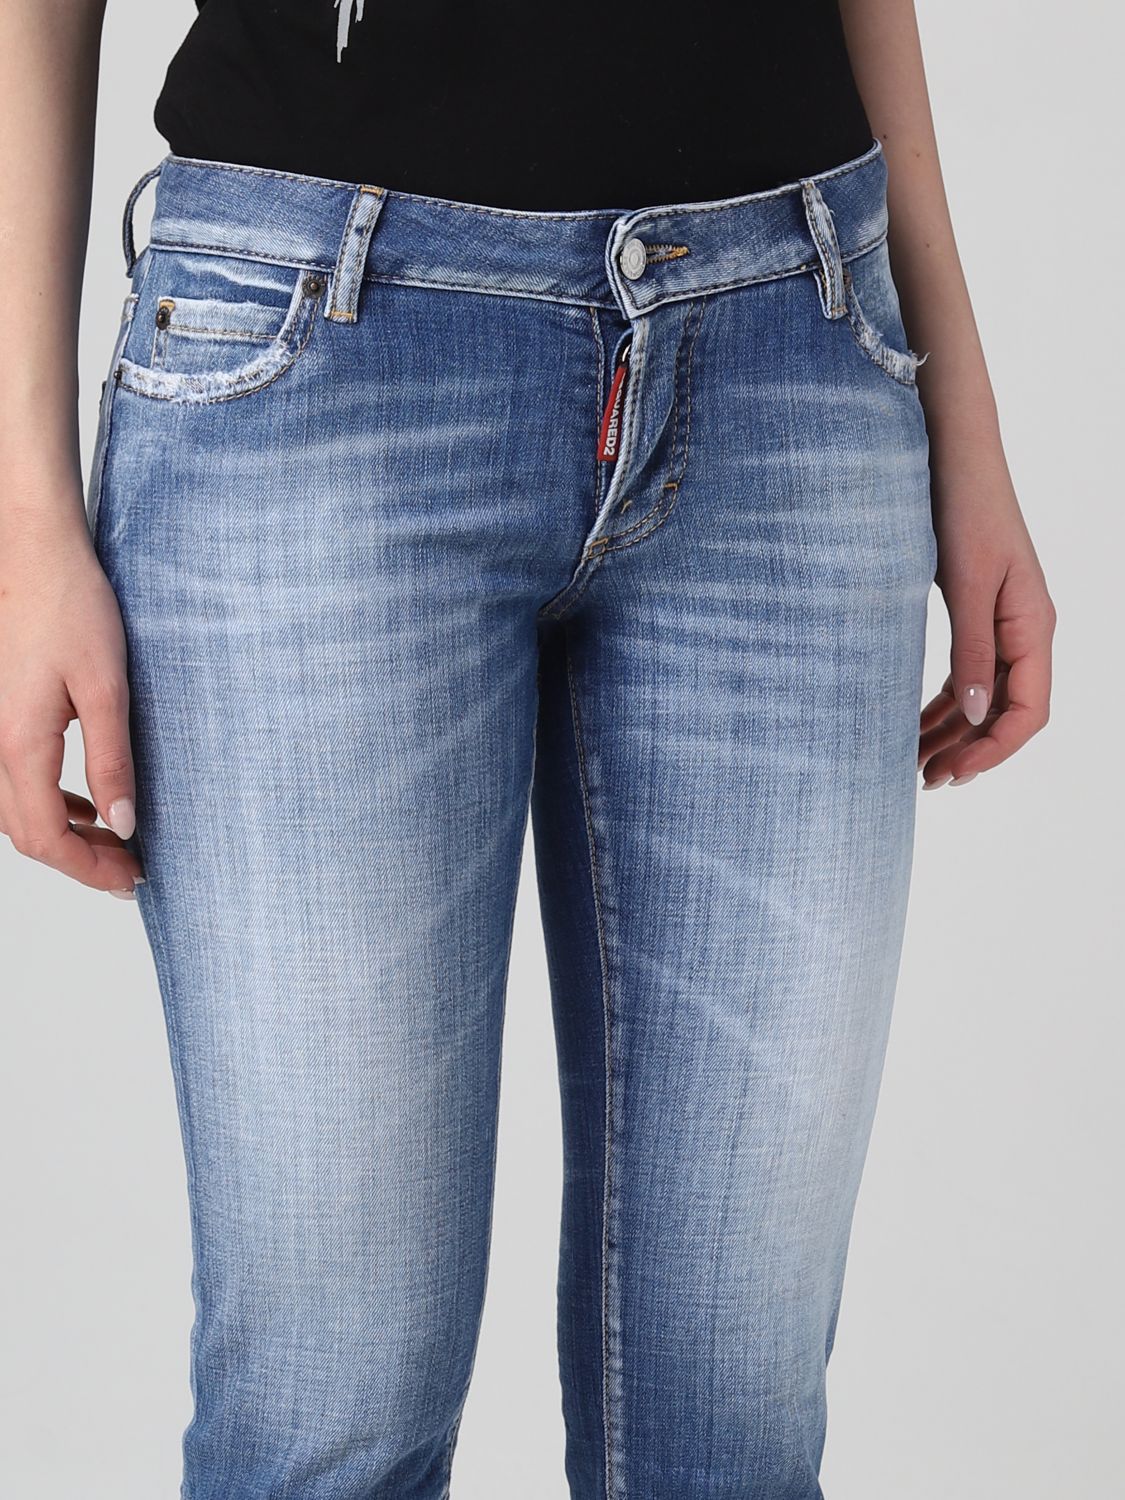 Jeans Dsquared2: Jeans Dsquared2 in denim blue navy 3